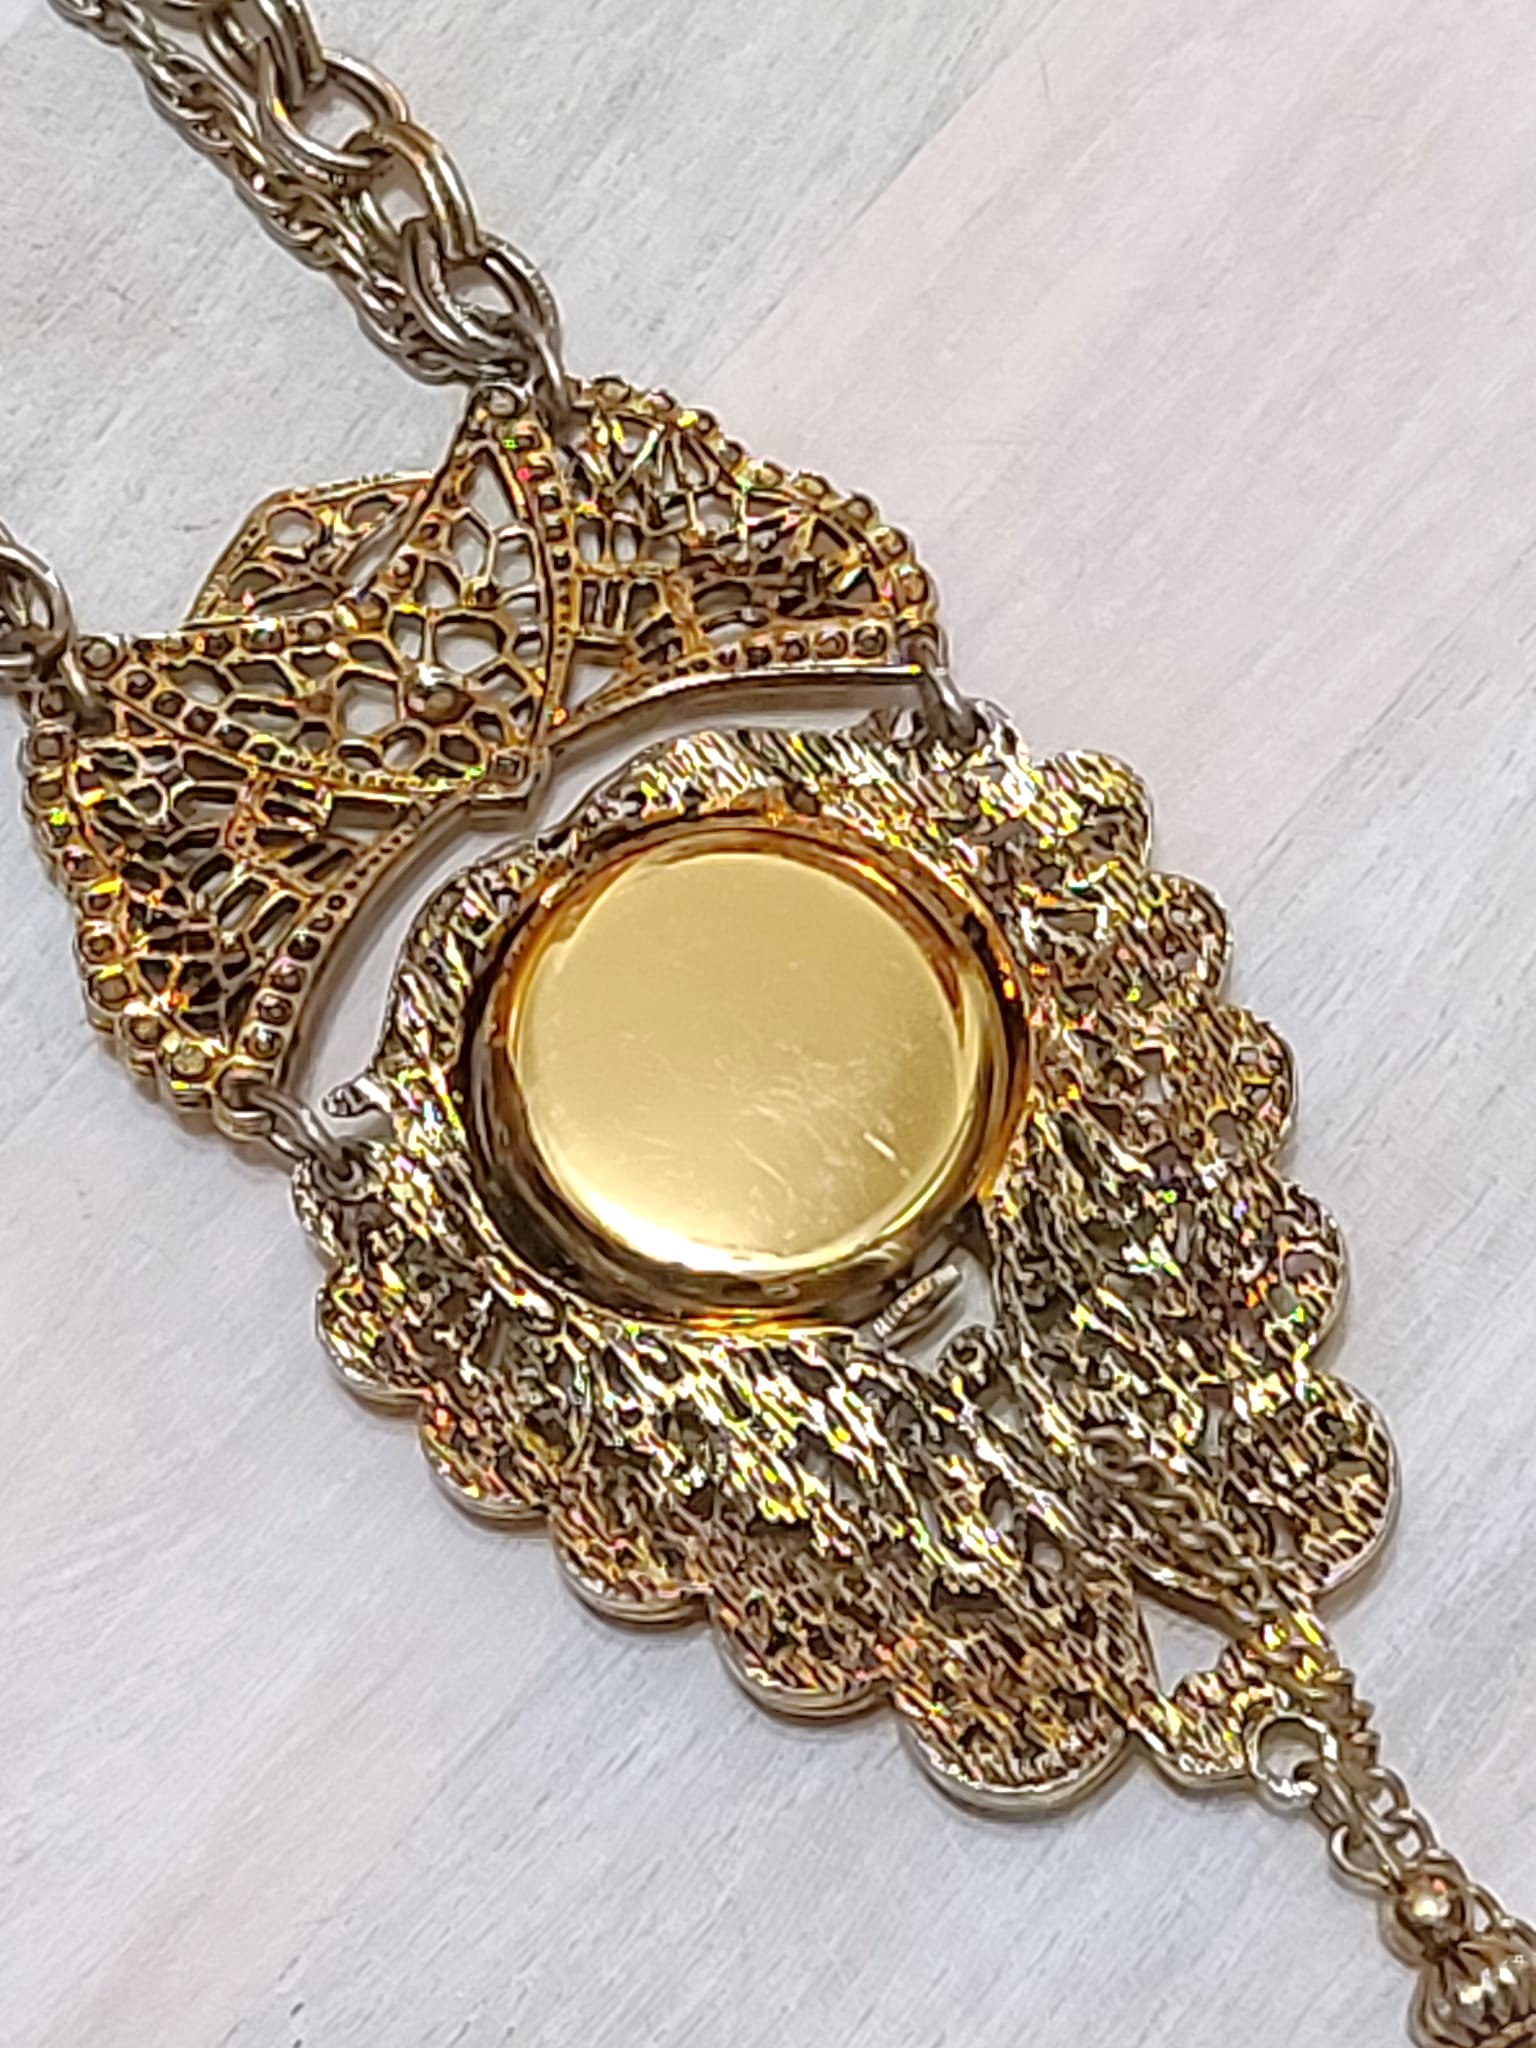 Le Jour 17 Jewels pendant watch necklace with multi strand chain